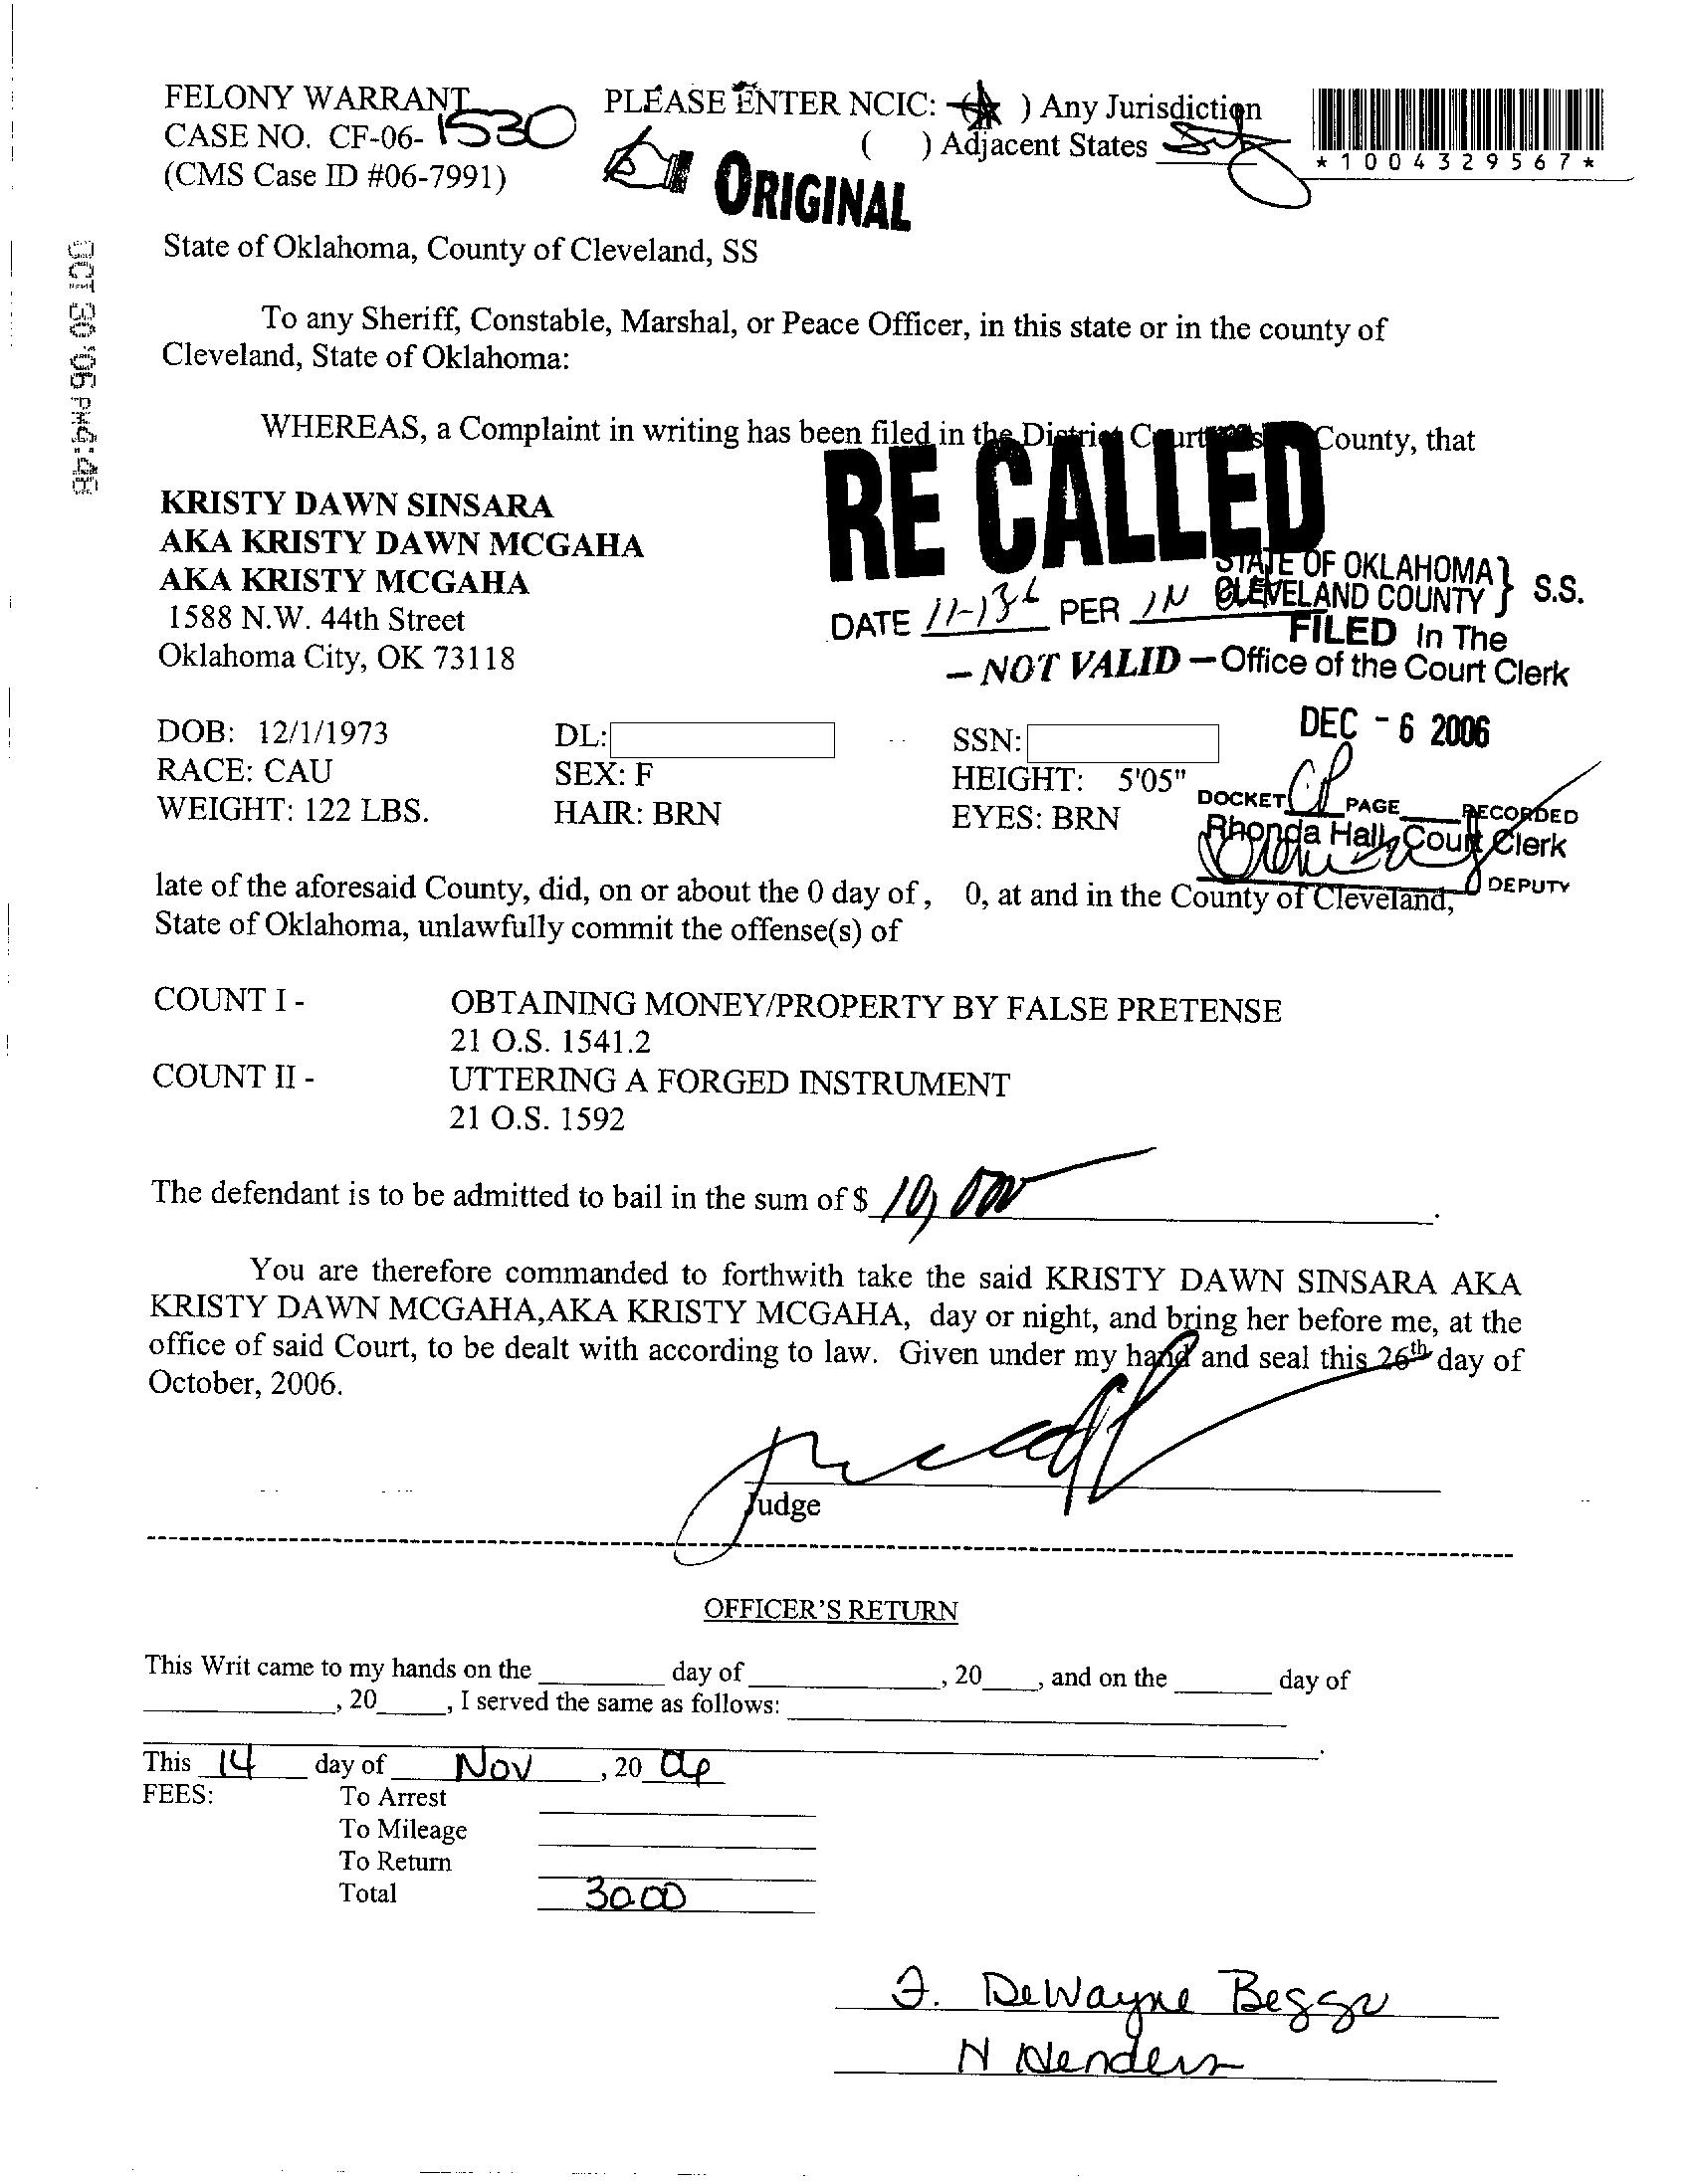 This is a copy of the felony warrant the judge issued to bring Kristy in.  Note that it was recalled after Kristy did appear in court with a bail amount set.